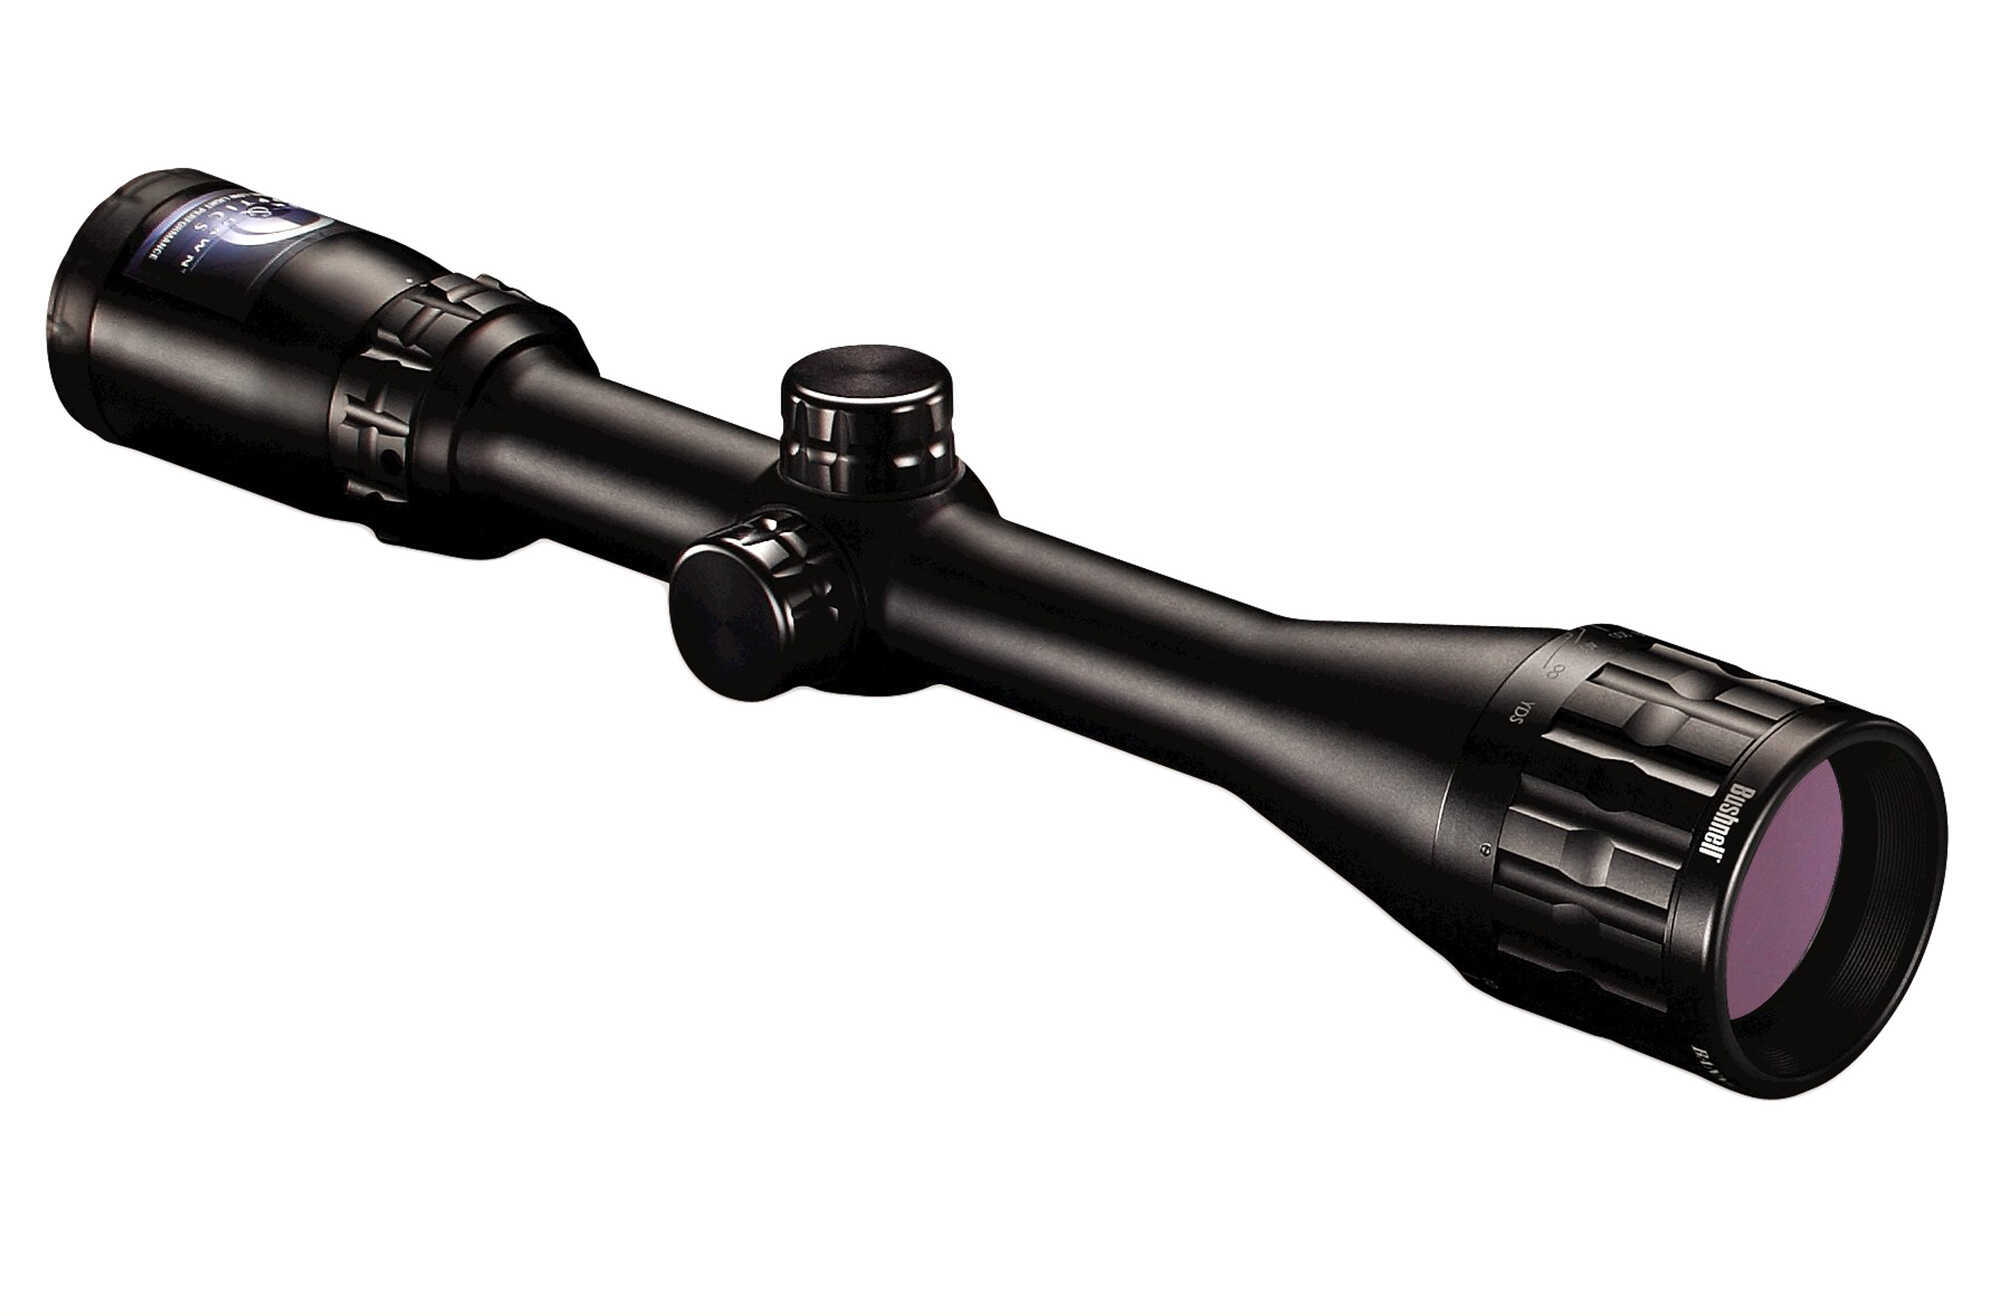 Bushnell Banner Rifle Scope 4-12X 40mm Multi-X Reticle Adjustable Objective Matte Finish 614124